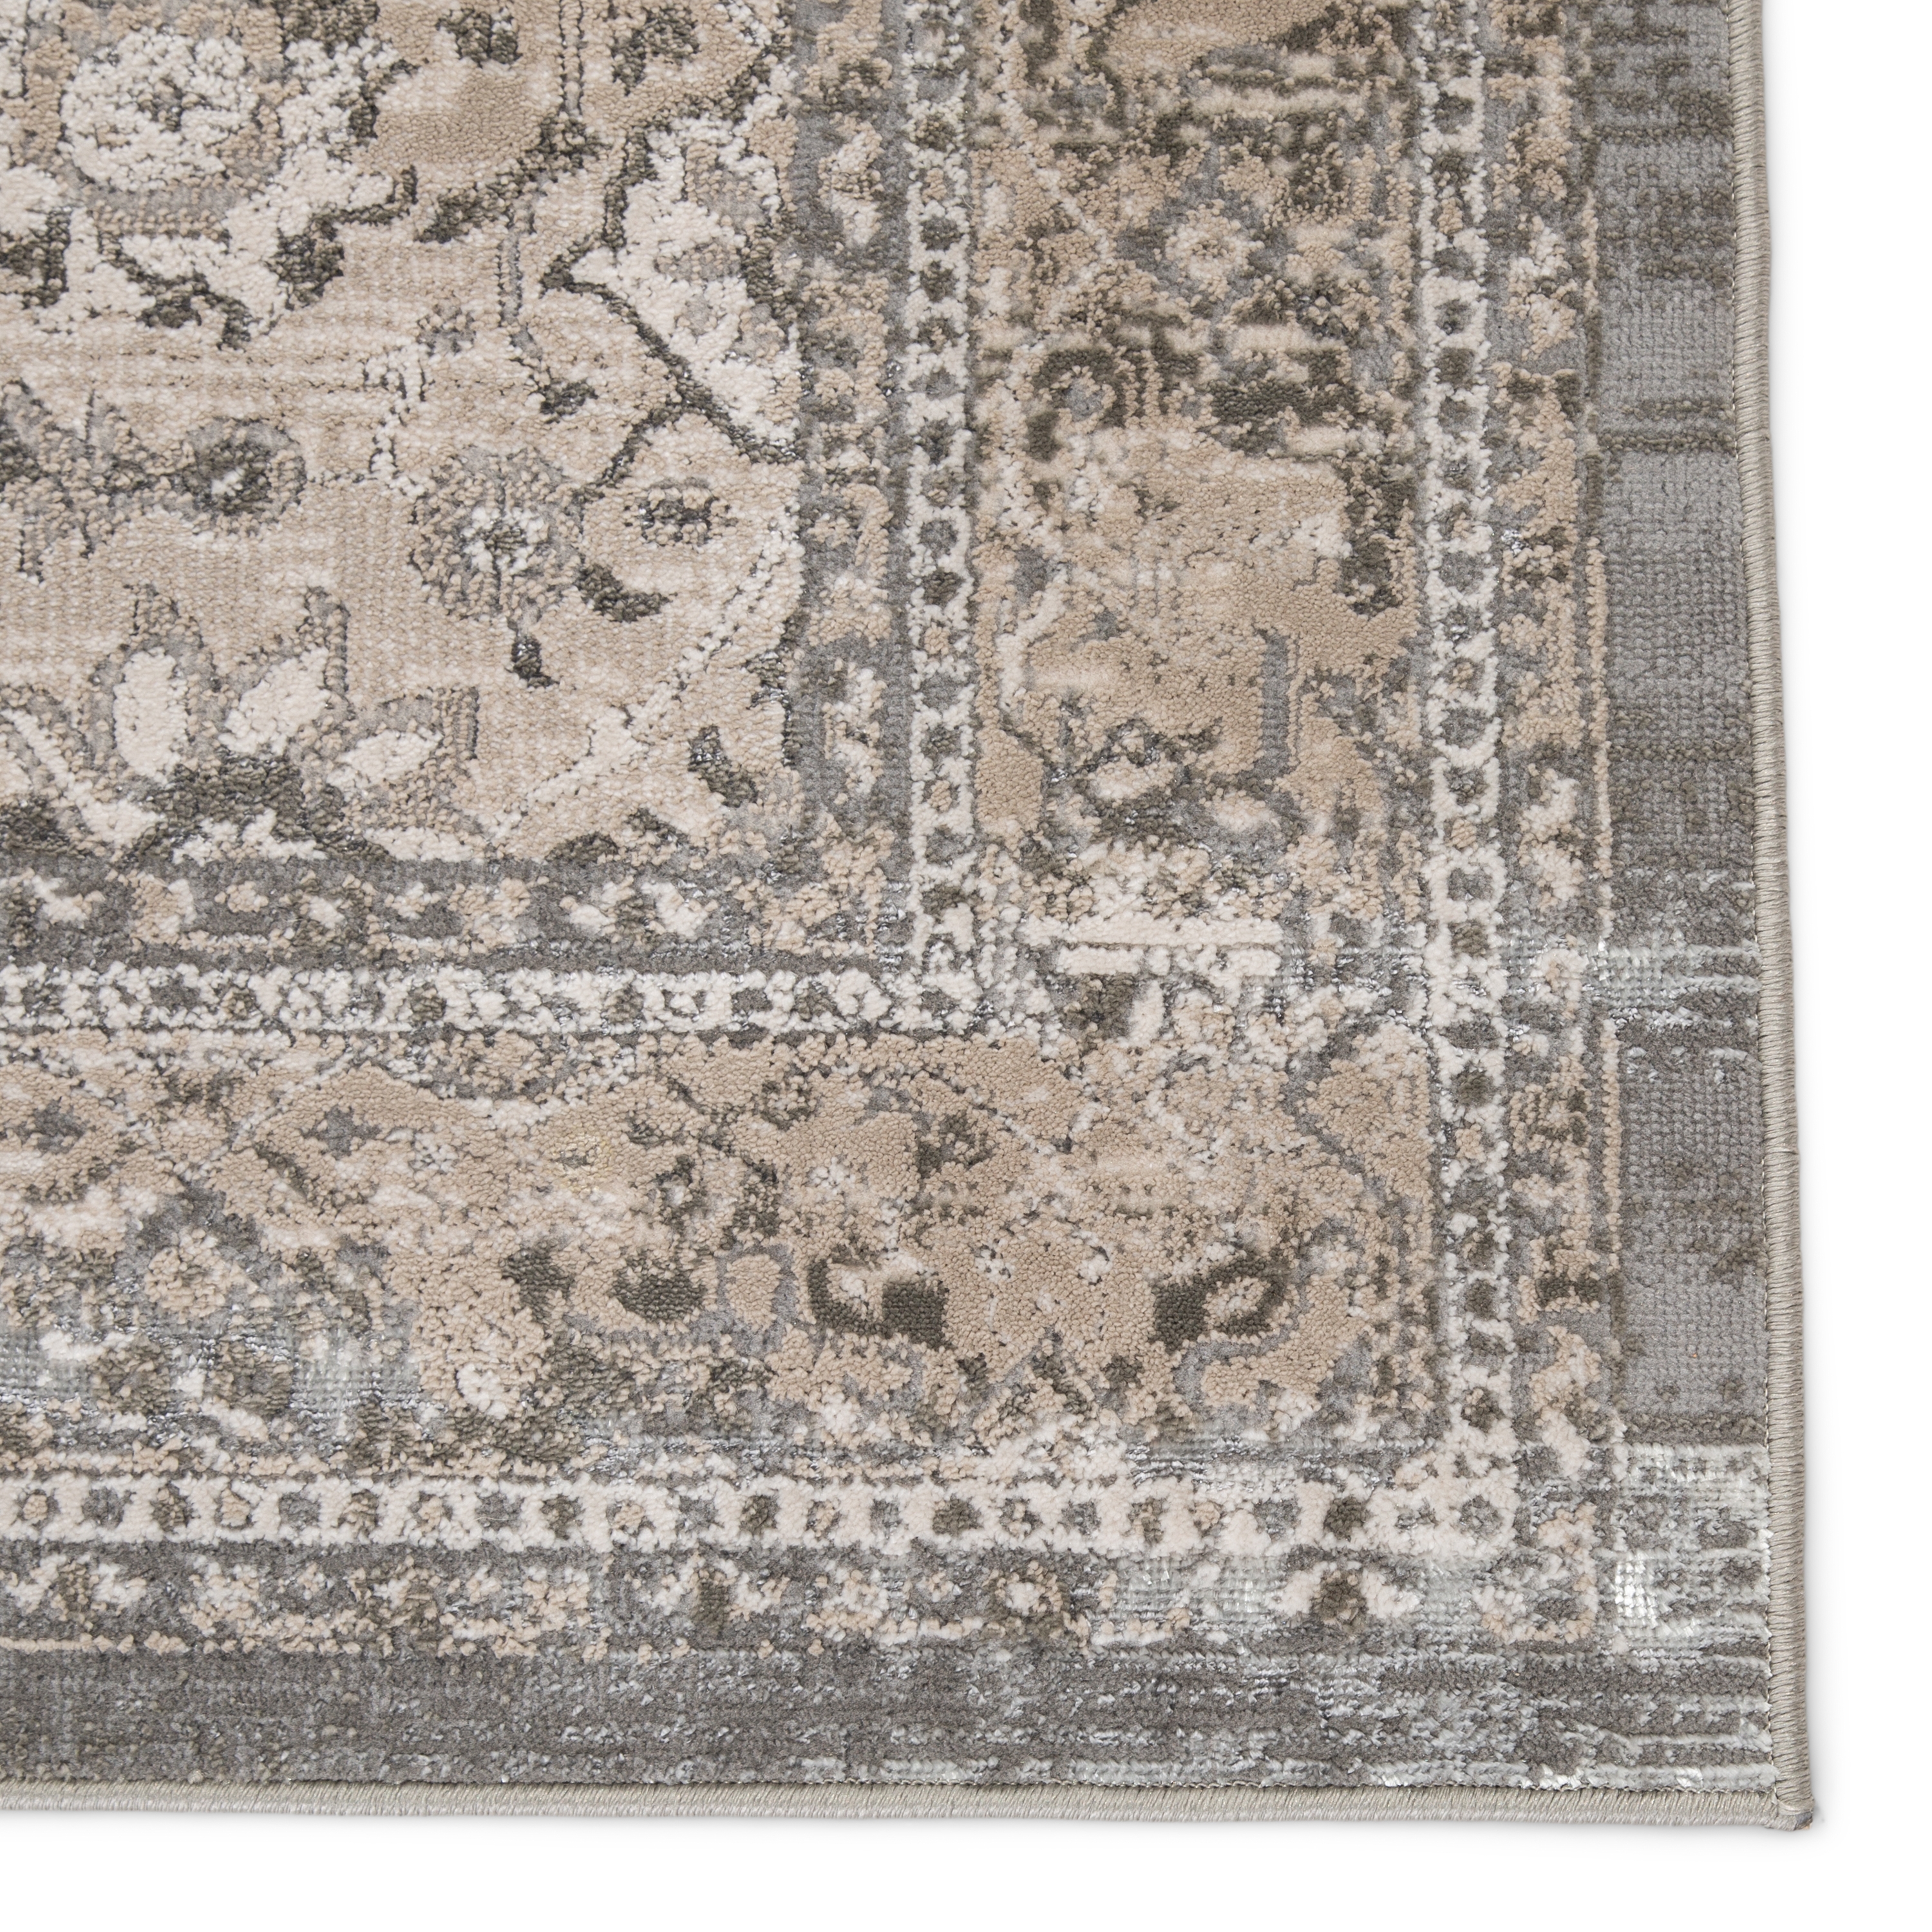 Vibe by Odel Oriental Gray/ White Area Rug (6'7"X9'6") - Image 3